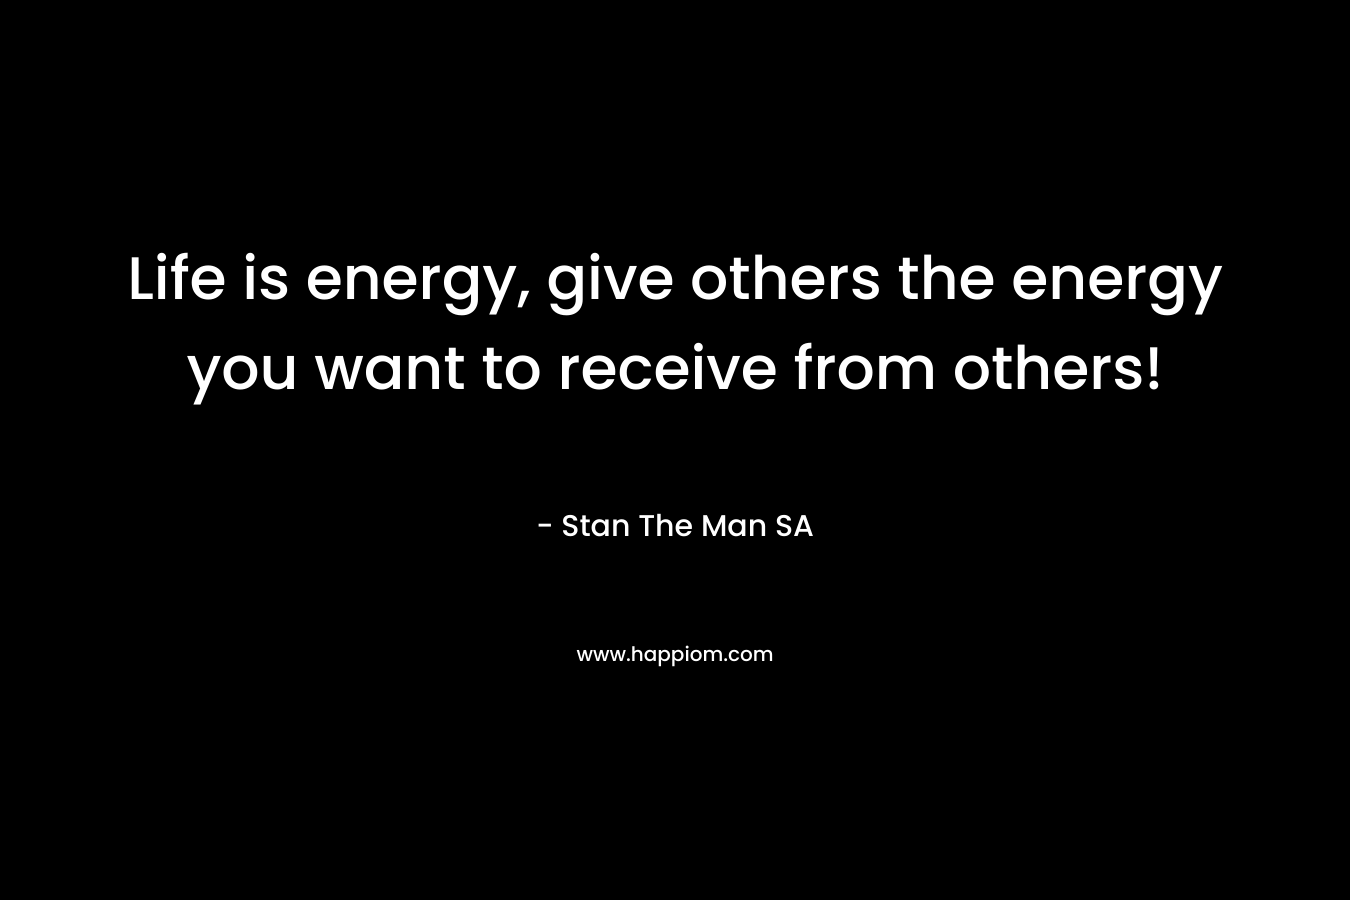 Life is energy, give others the energy you want to receive from others!